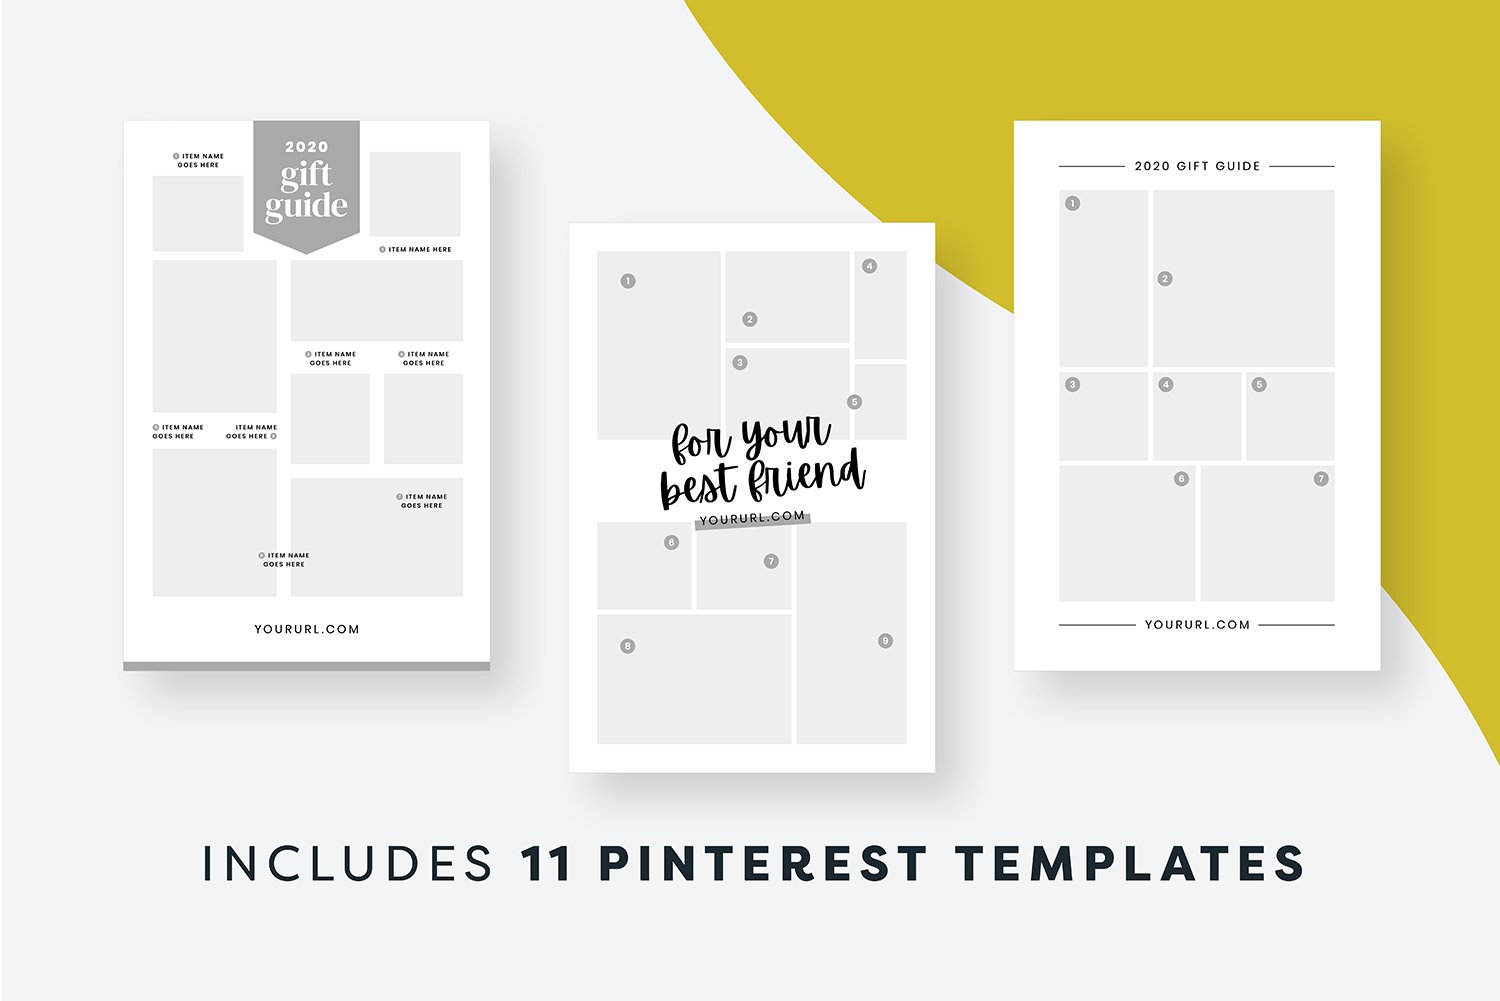 This collection includes 11 Pinterest templates.